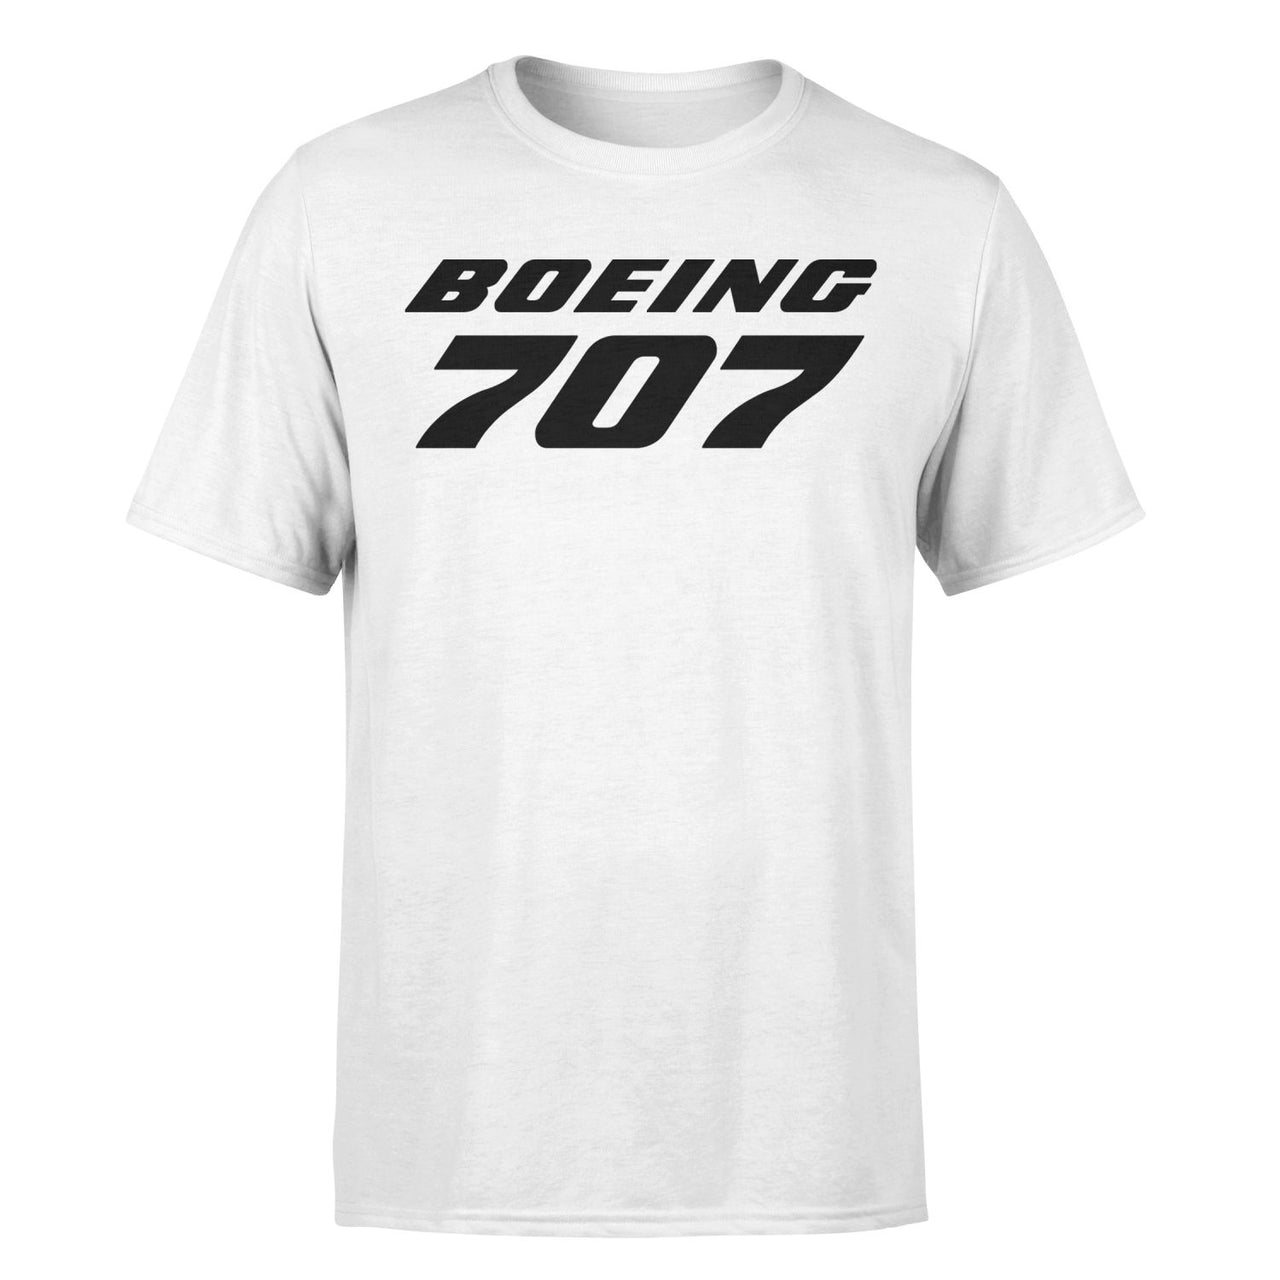 Boeing 707 & Text Designed T-Shirts